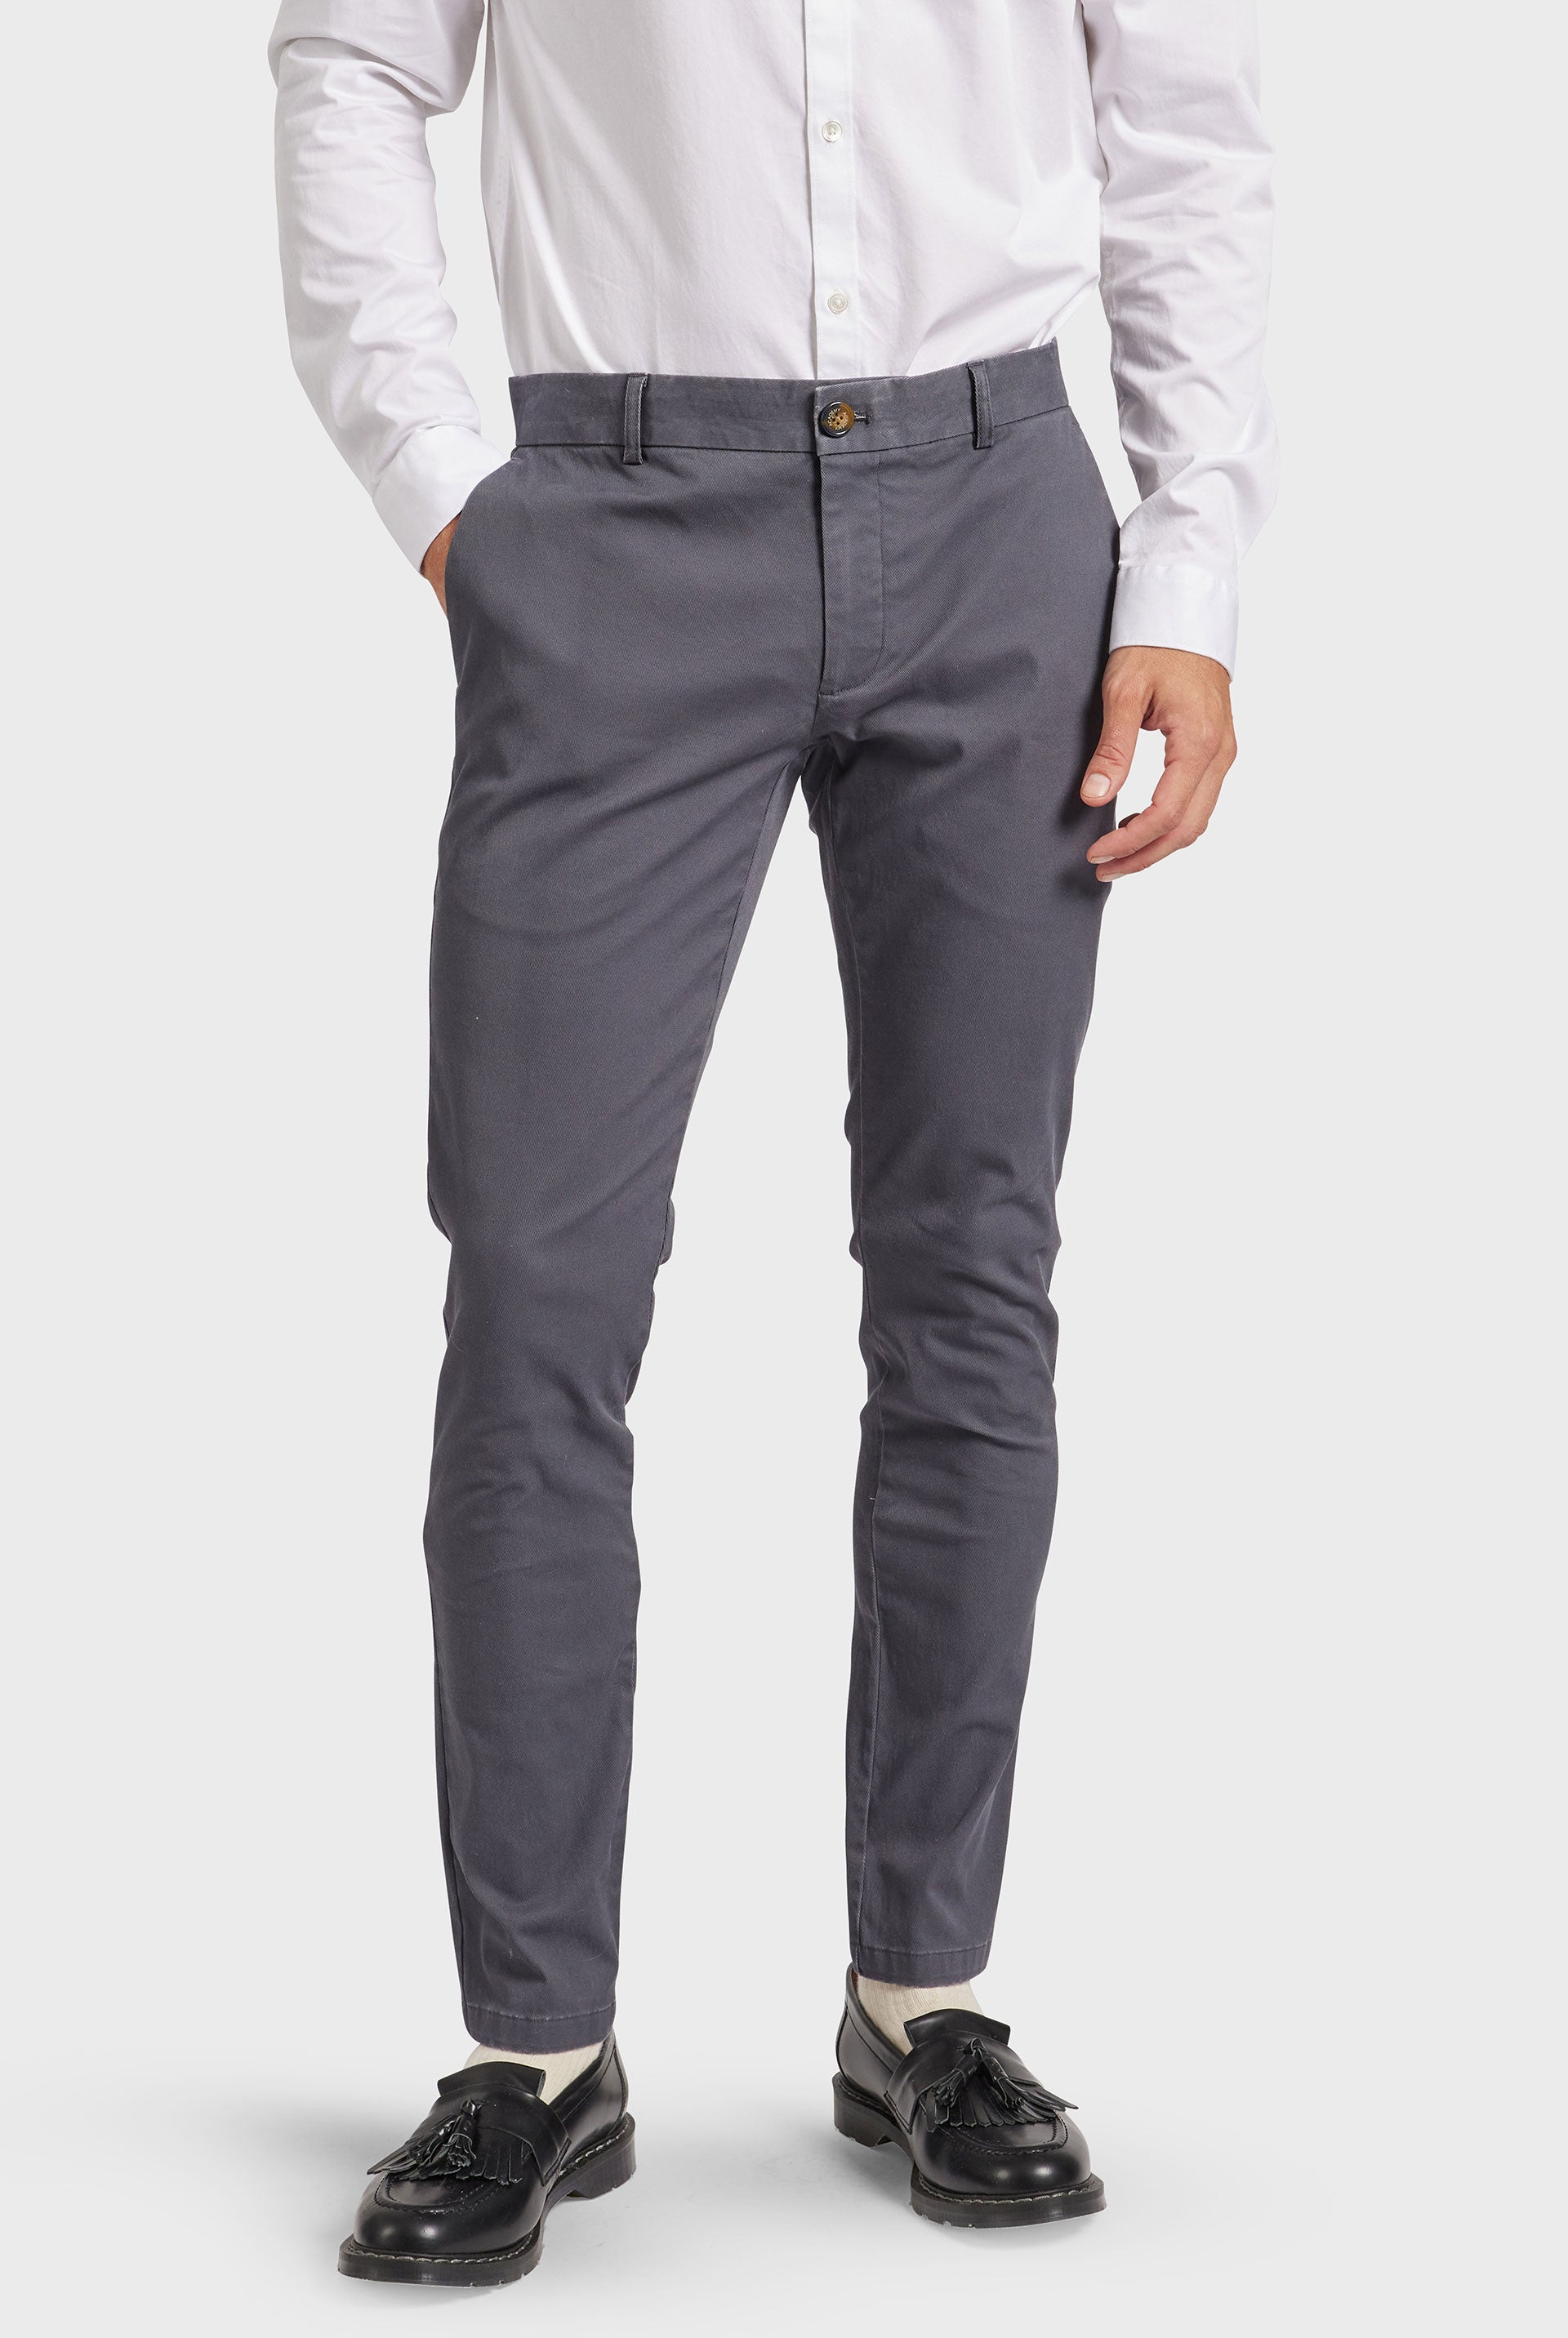 Seattle Deluxe Skinny Chino in Charcoal | Academy Brand